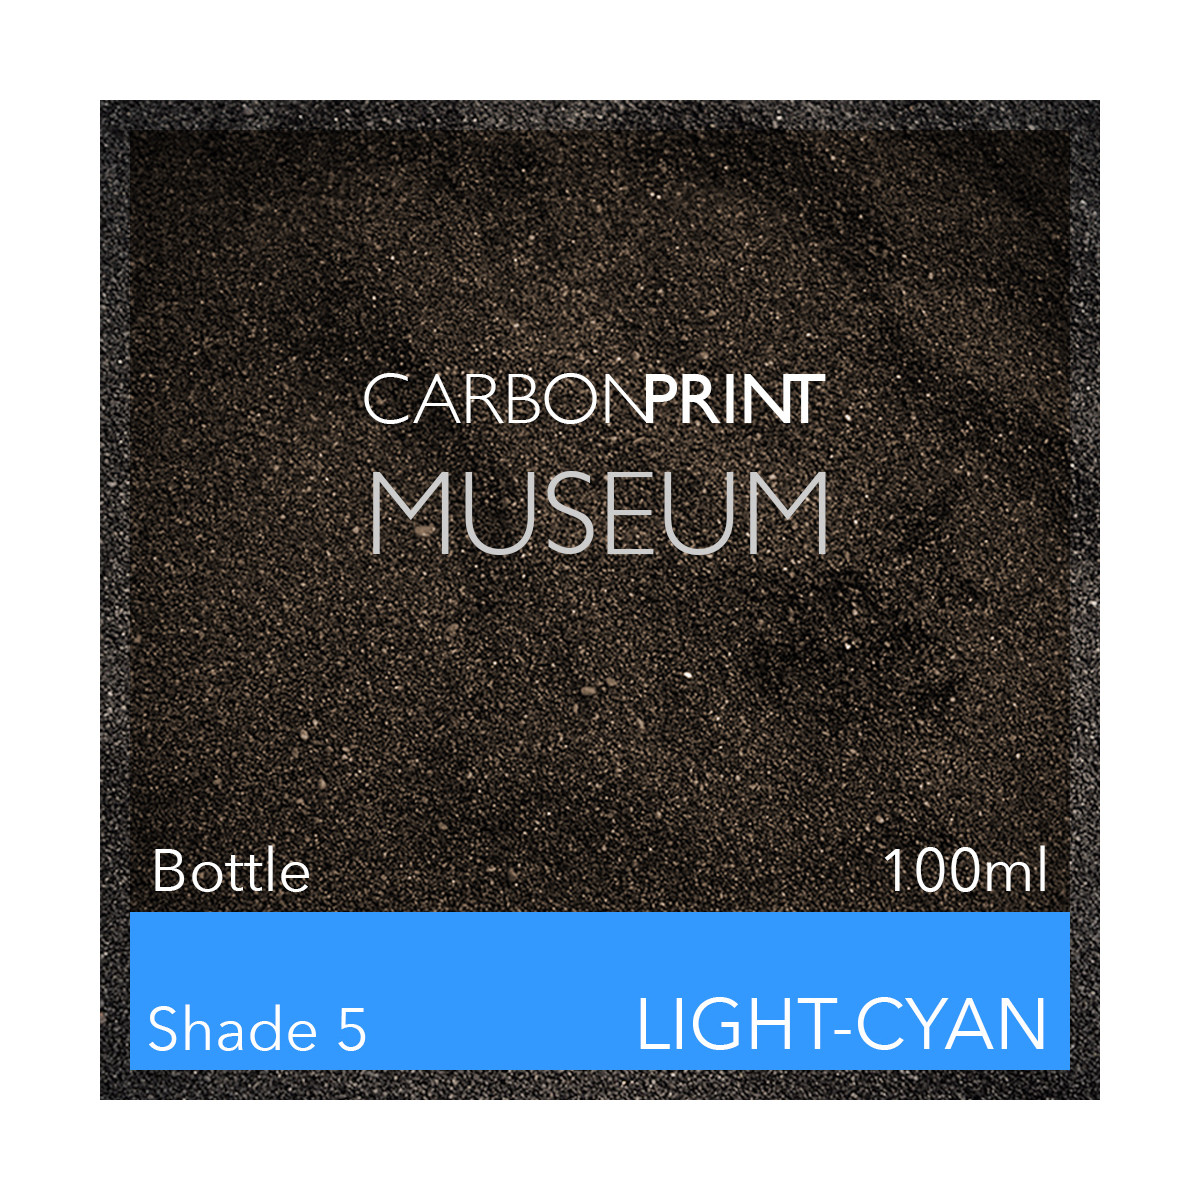 Carbonprint Museum Shade5 Channel LC 100ml